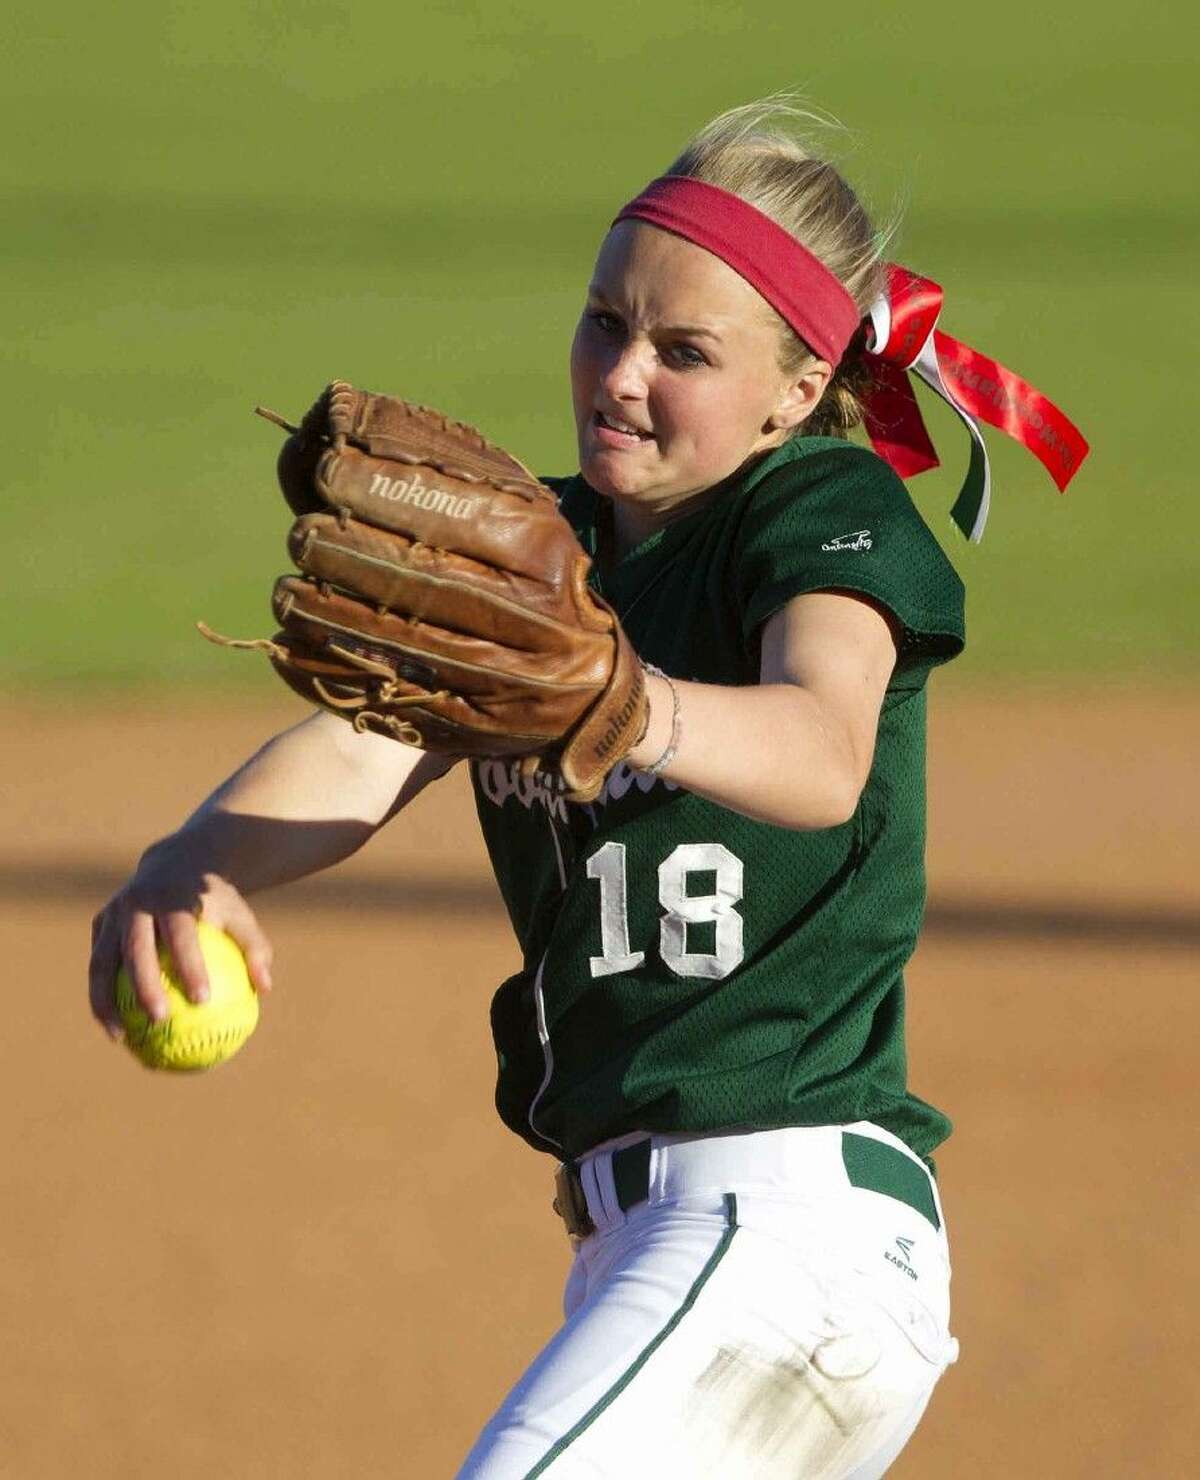 The Woodlands pitcher Emily Langkamp throws during a District 16-6A softball game Saturday. To view or purchase this photo and others like it, visit HCNpics.com.